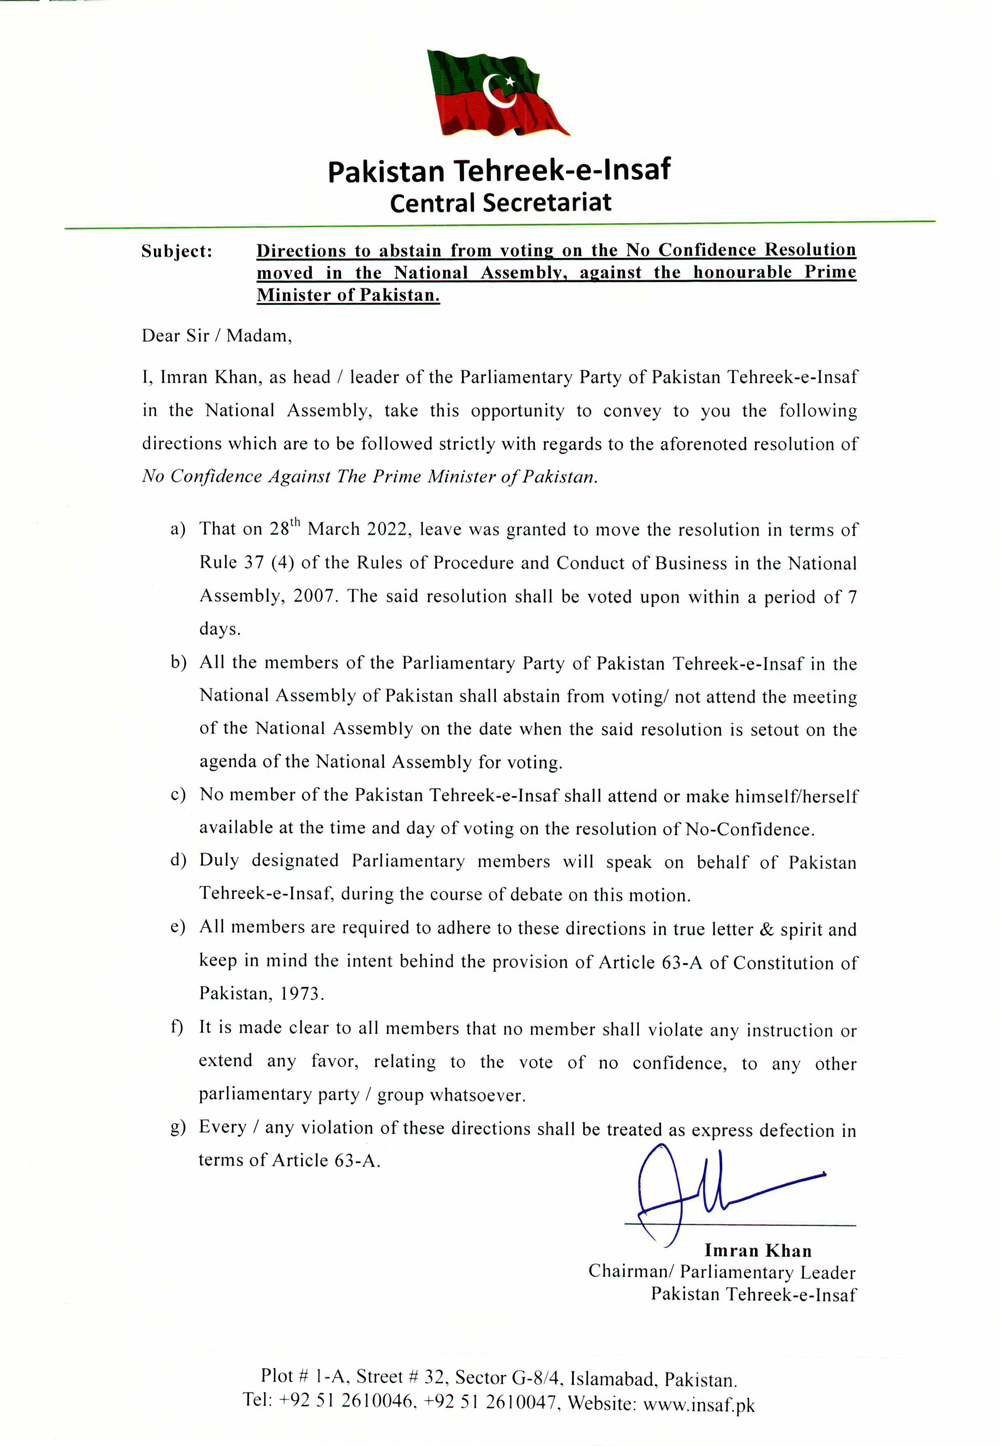 The letter of Prime Minister Imran Khan sent to the PTI MNAs. — Photo by author